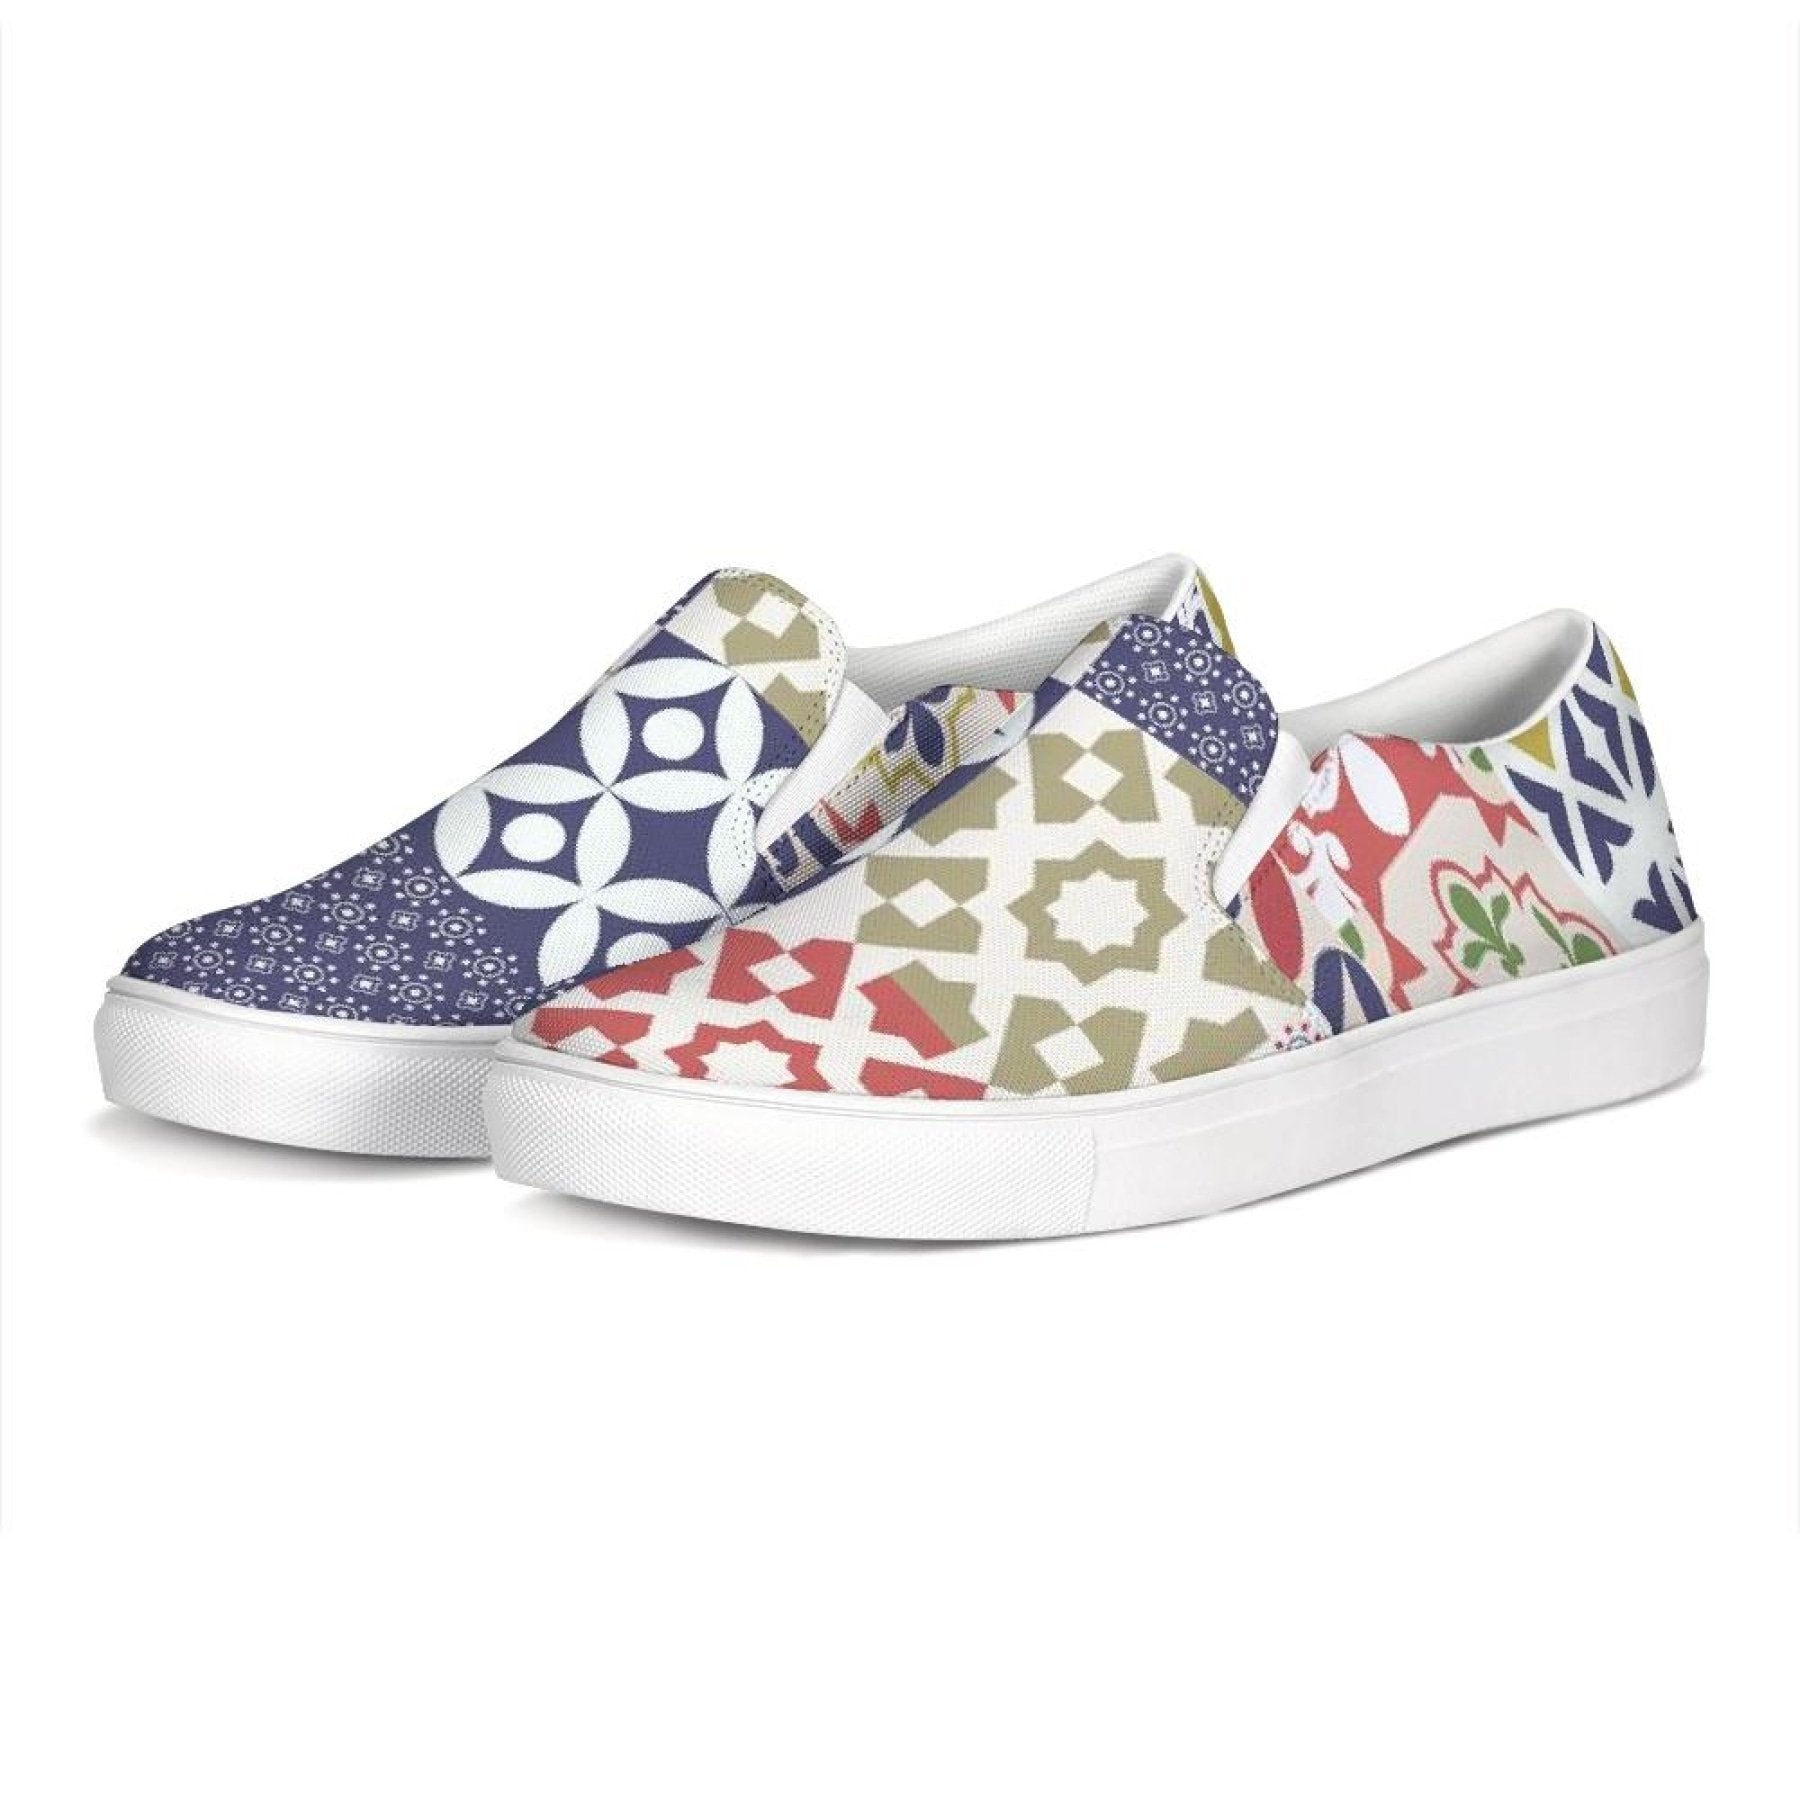 Womens Sneakers, Multicolor Patch Style Low Top Slip-On Canvas Shoes